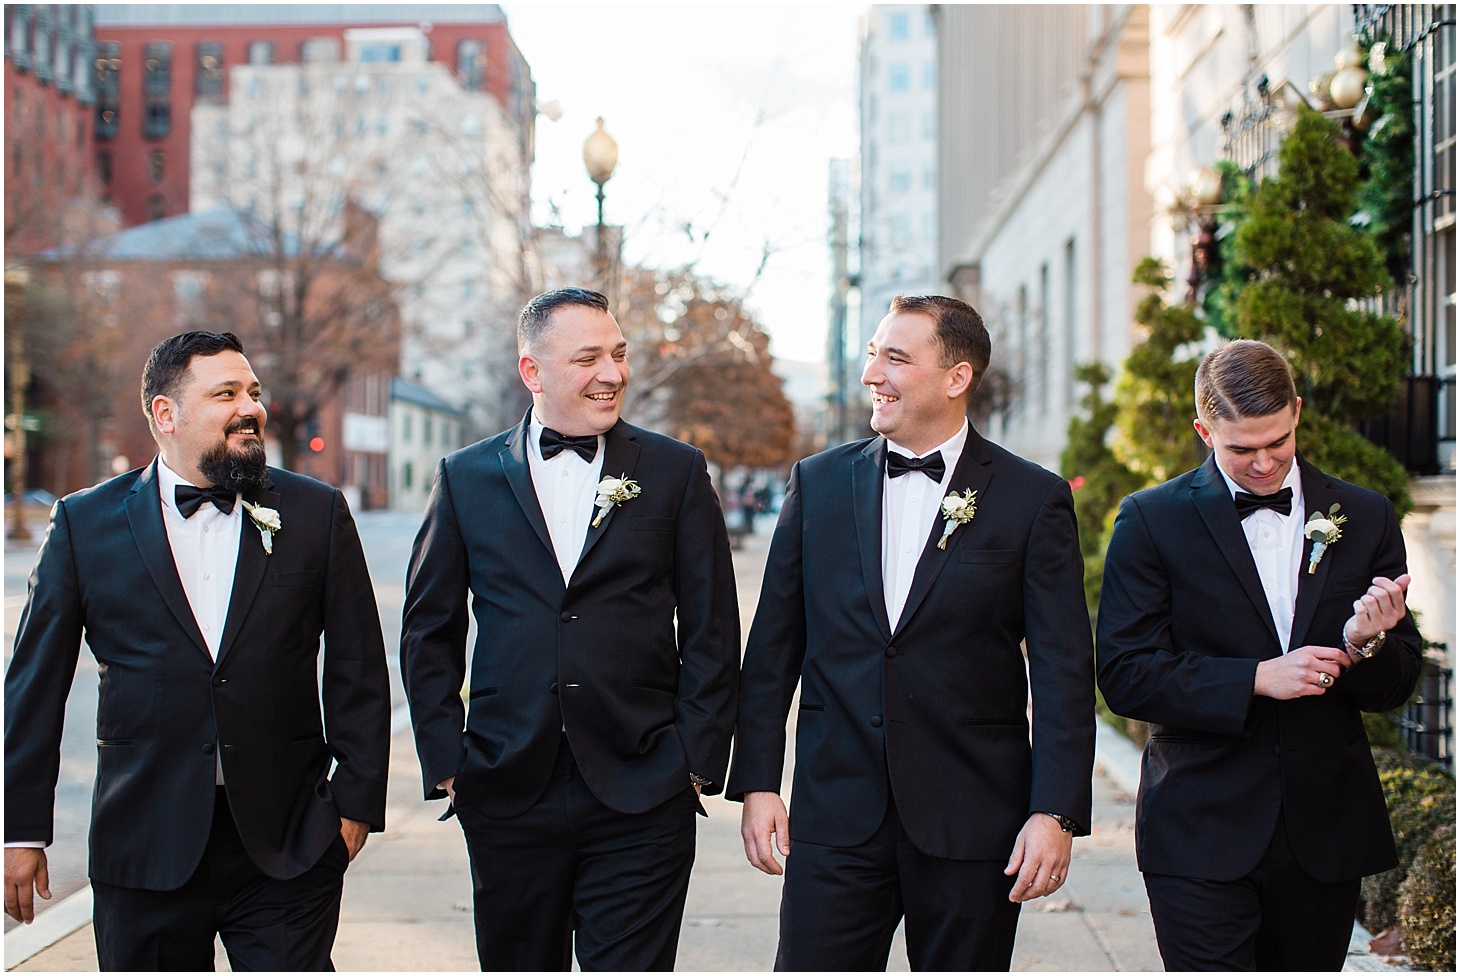 Wedding Party Portraits at the Army and Navy Club | Luxe Winter Wedding in Washington, DC | Sarah Bradshaw Photography | Washington DC Wedding Photographer